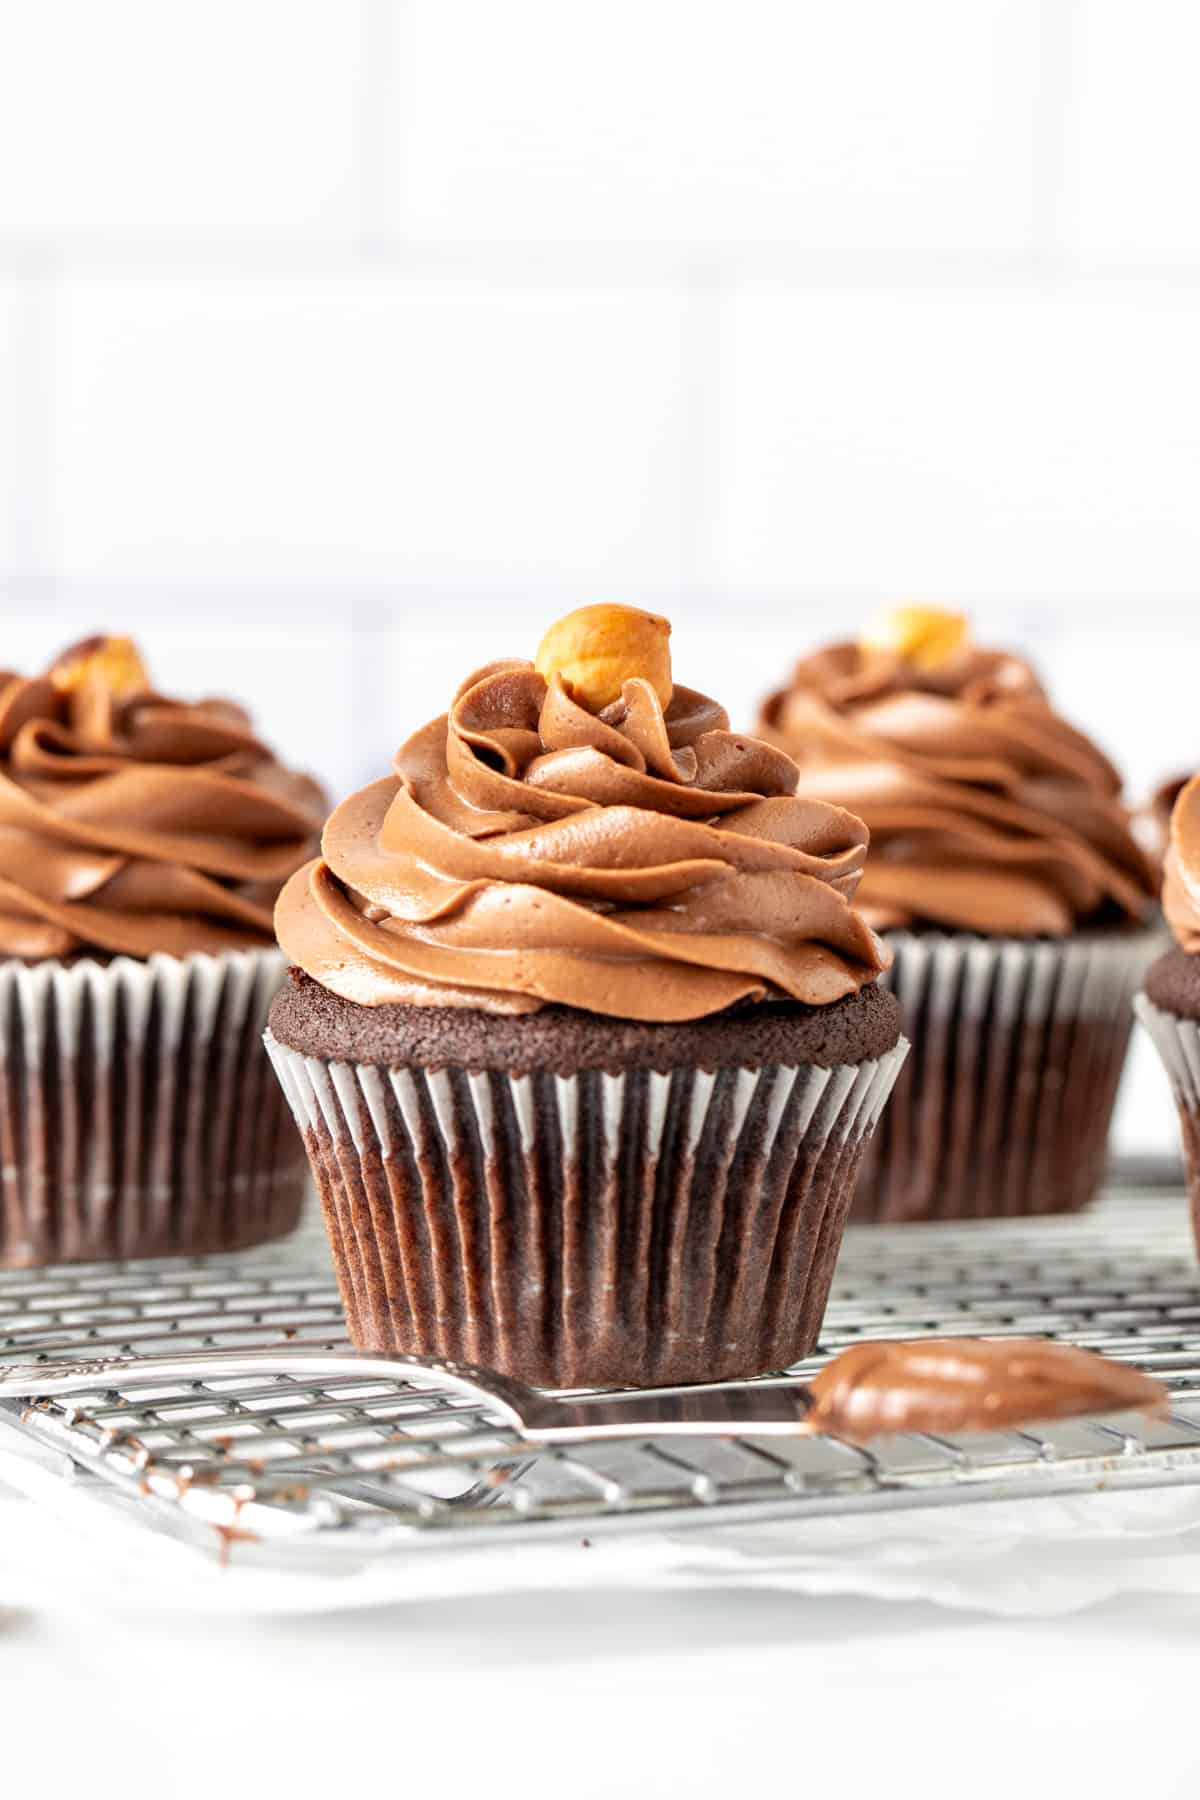 Chocolate cupcakes piped with creamy Nutella buttercream frosting